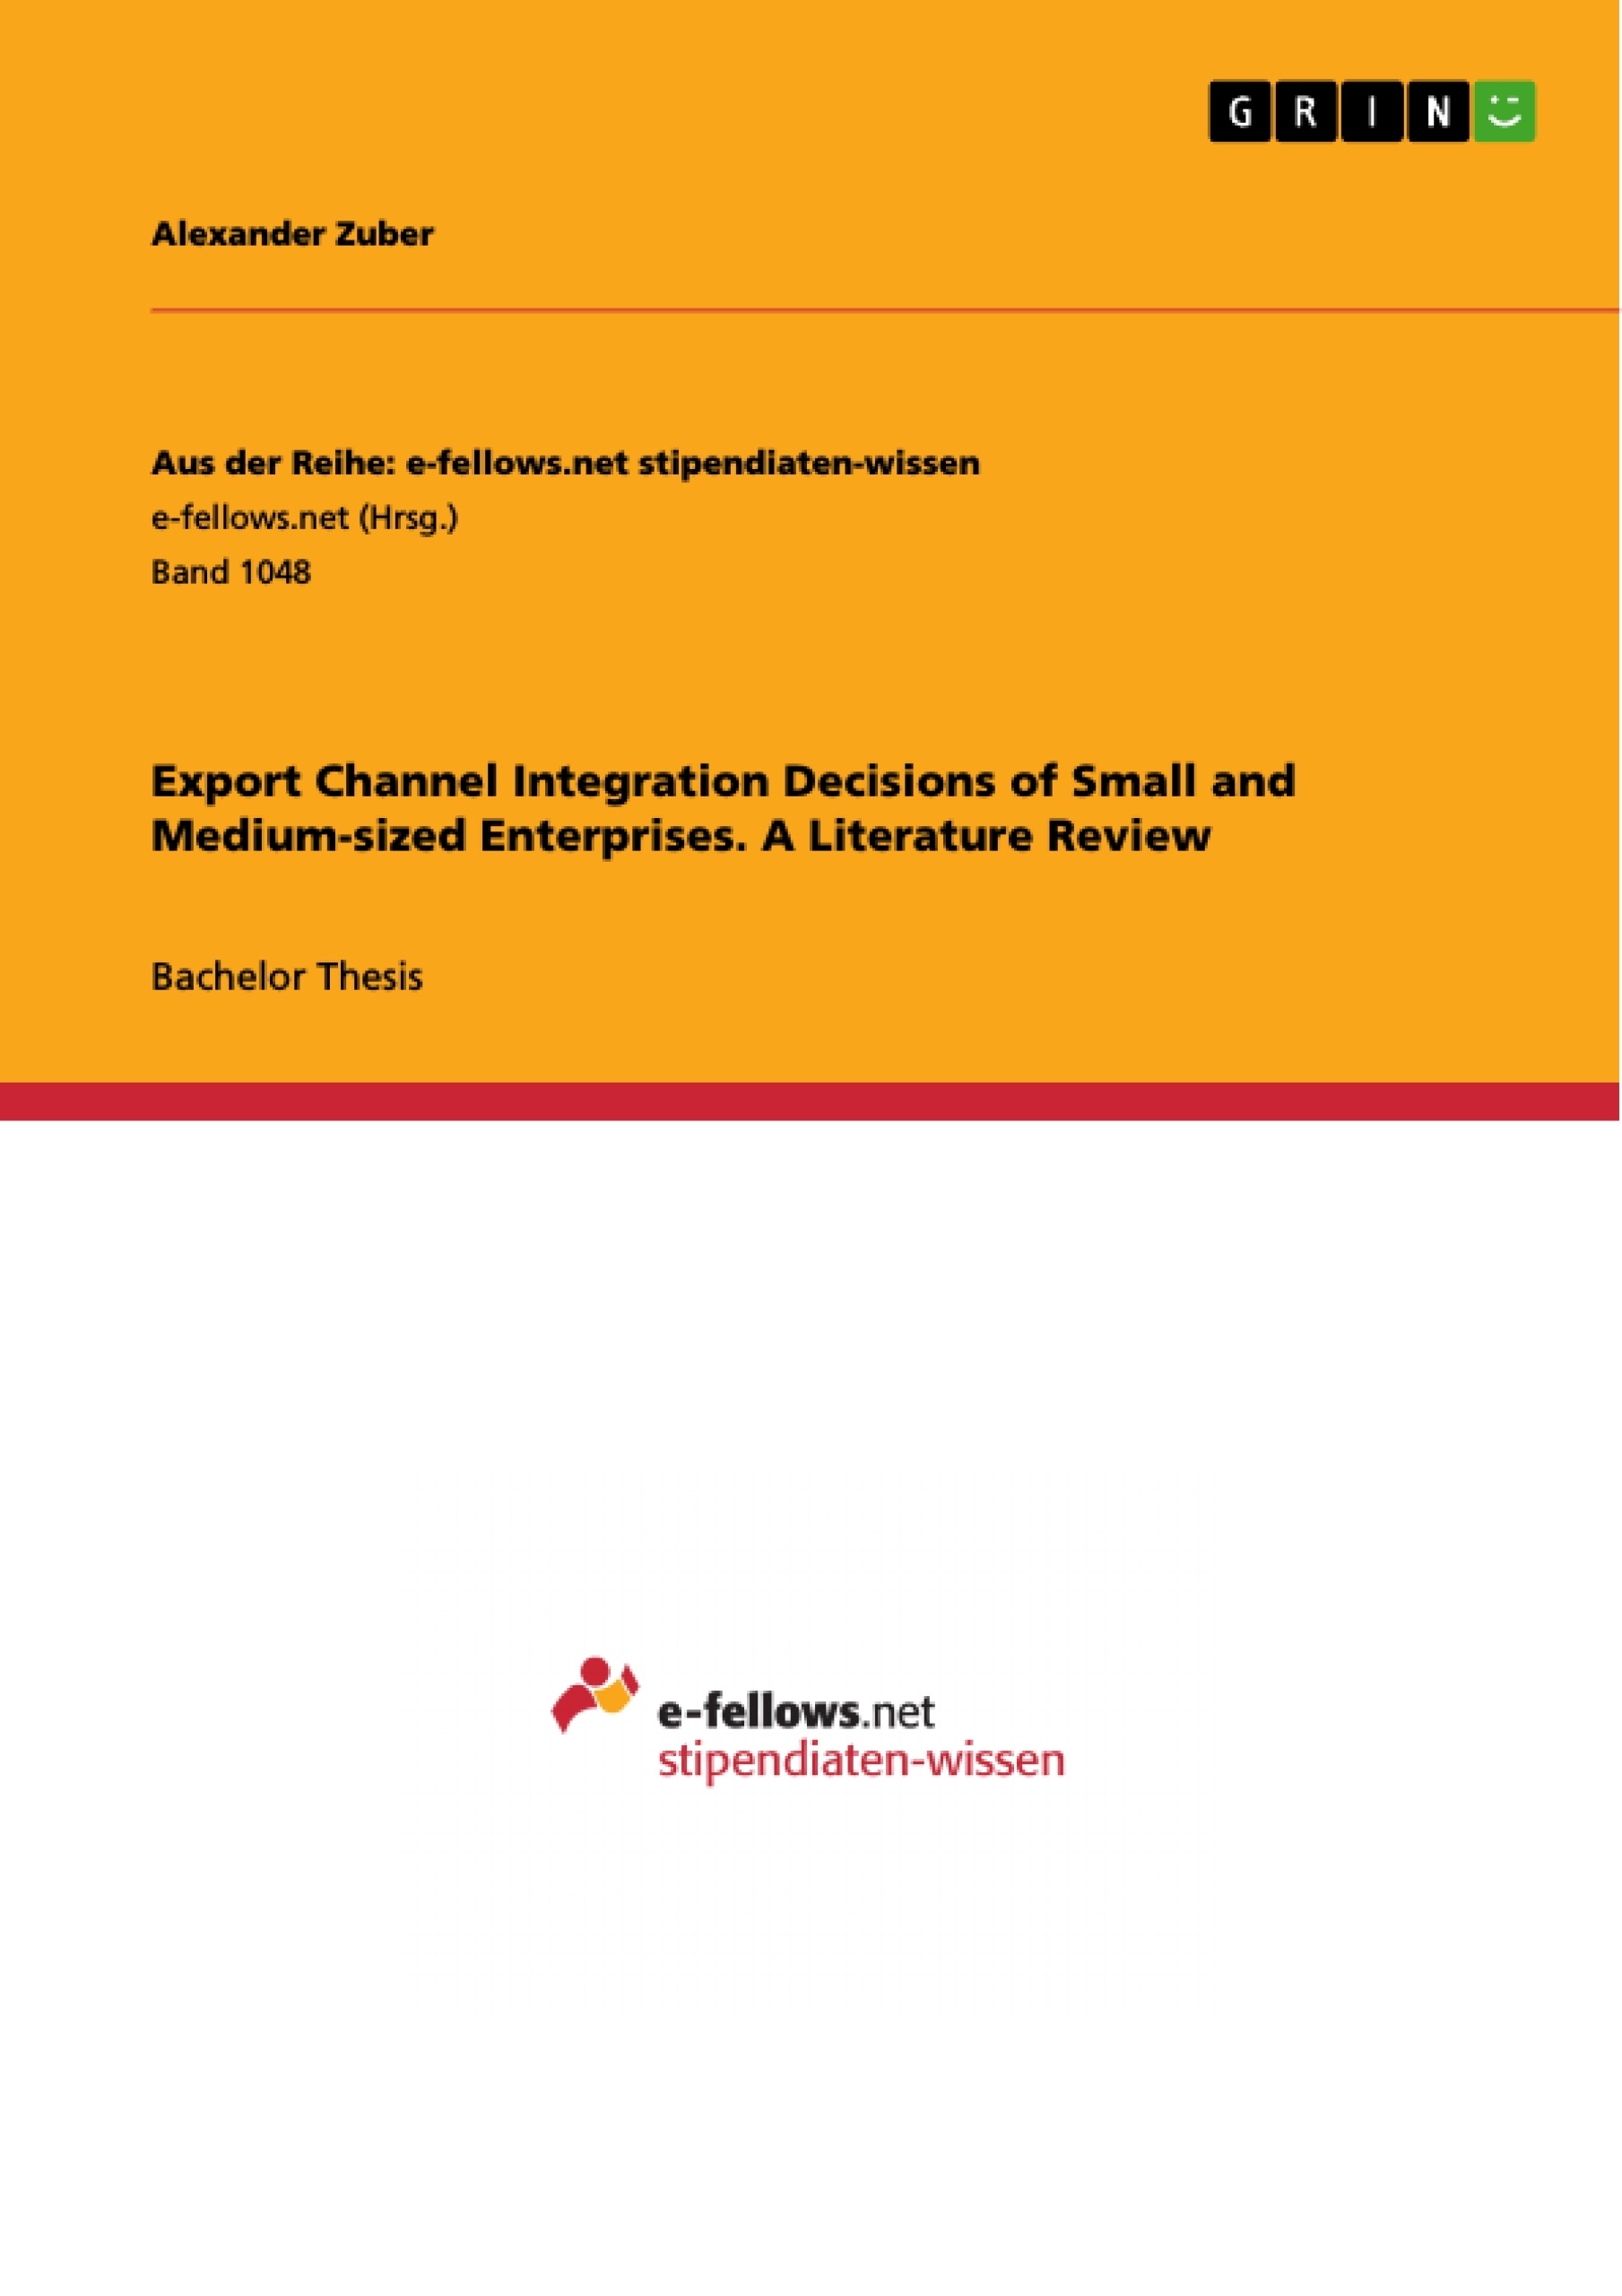 Title: Export Channel Integration Decisions of Small and Medium-sized Enterprises. A Literature Review